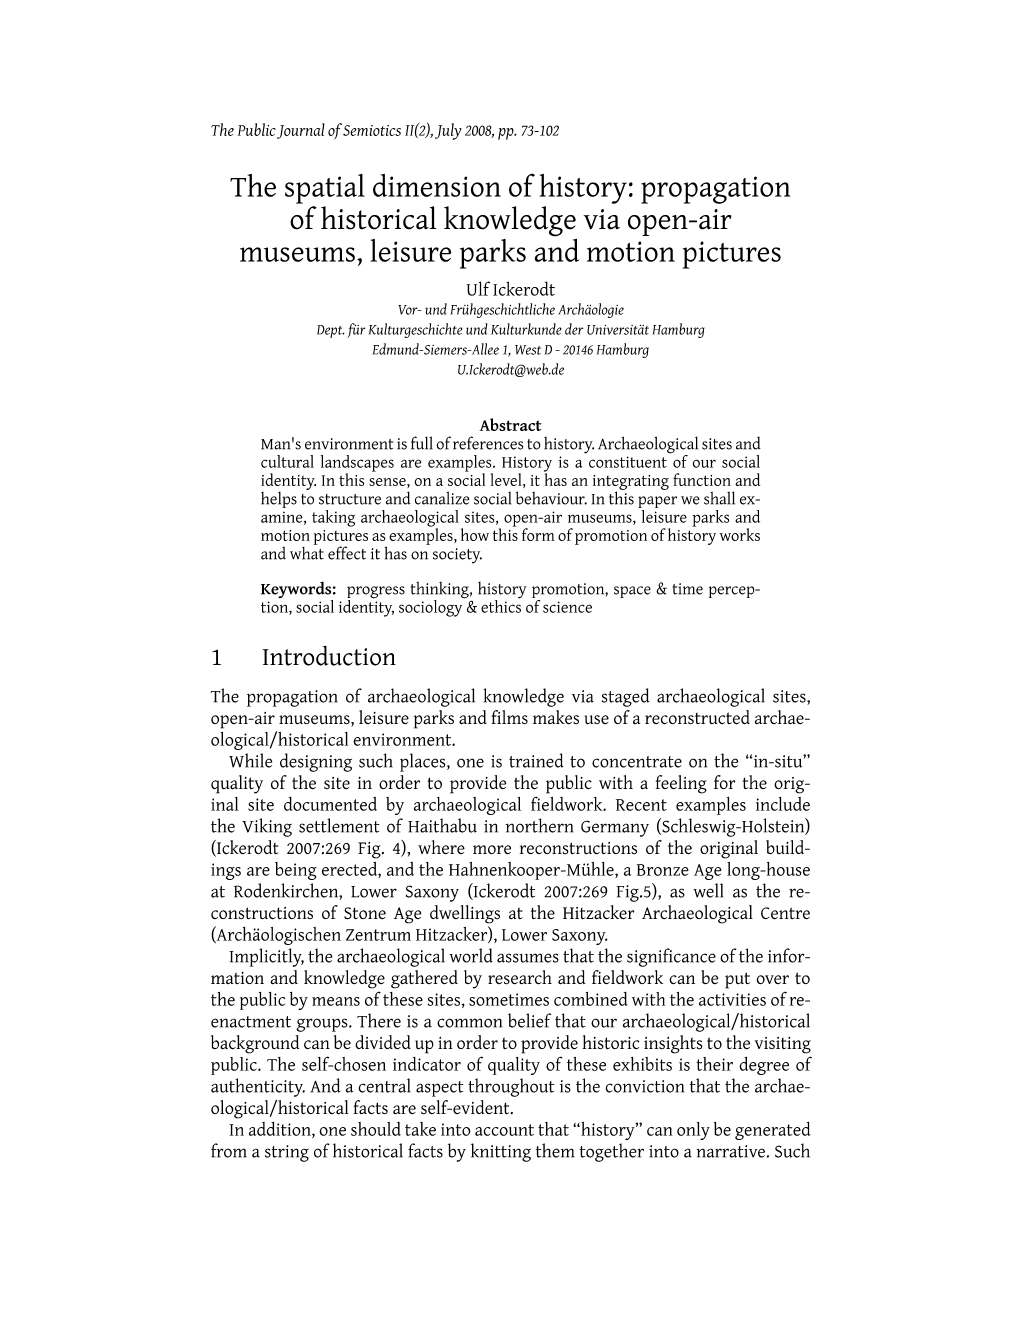 The Spatial Dimension of History: Propagation of Historical